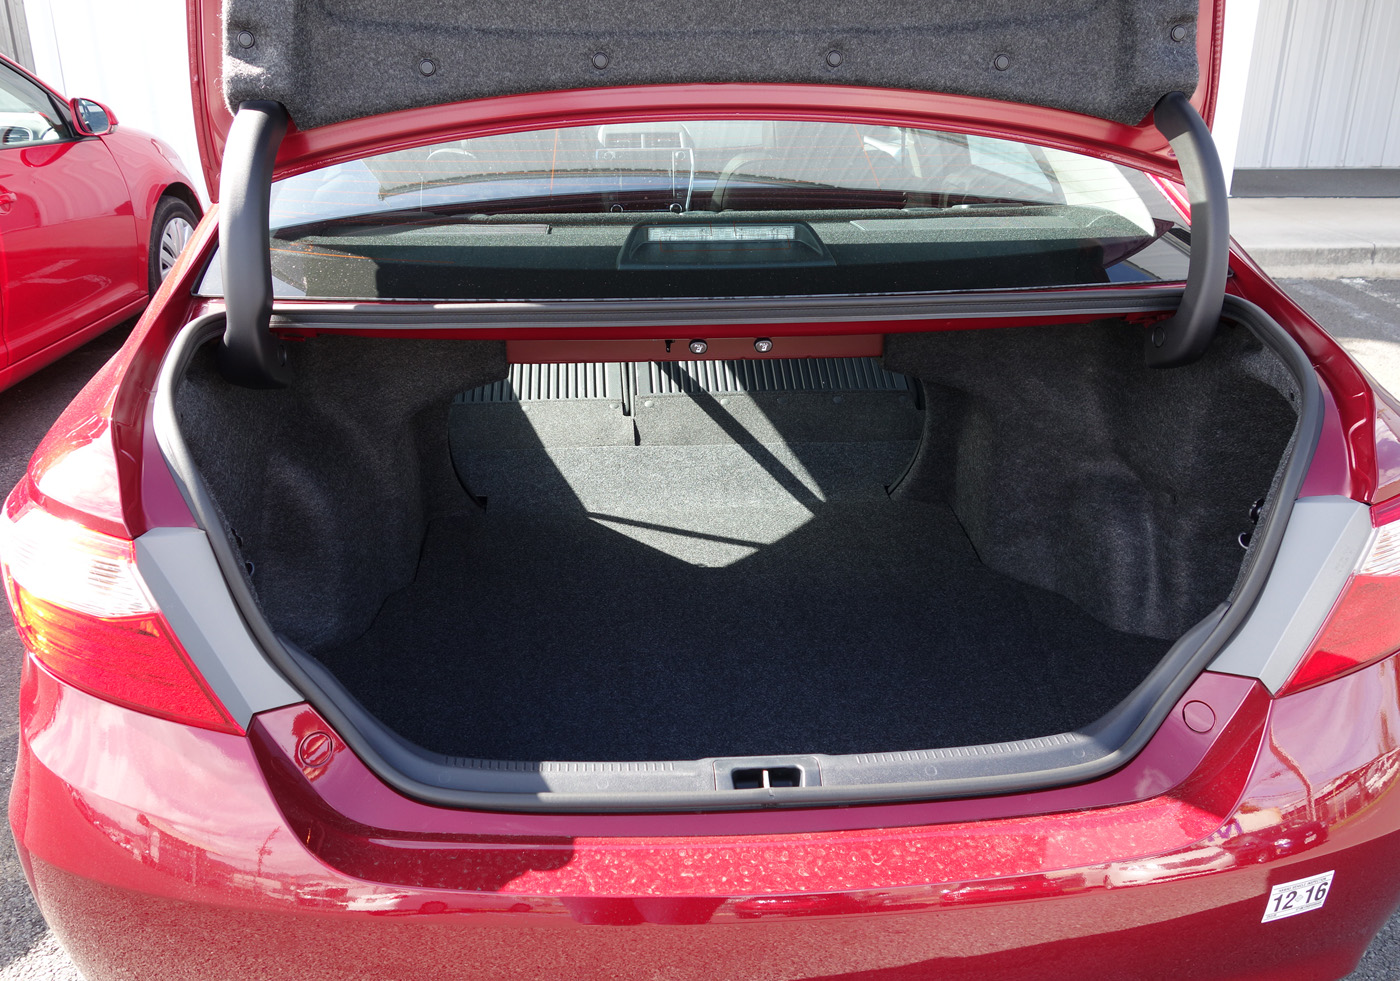 The car trunk, open, with the seat down.